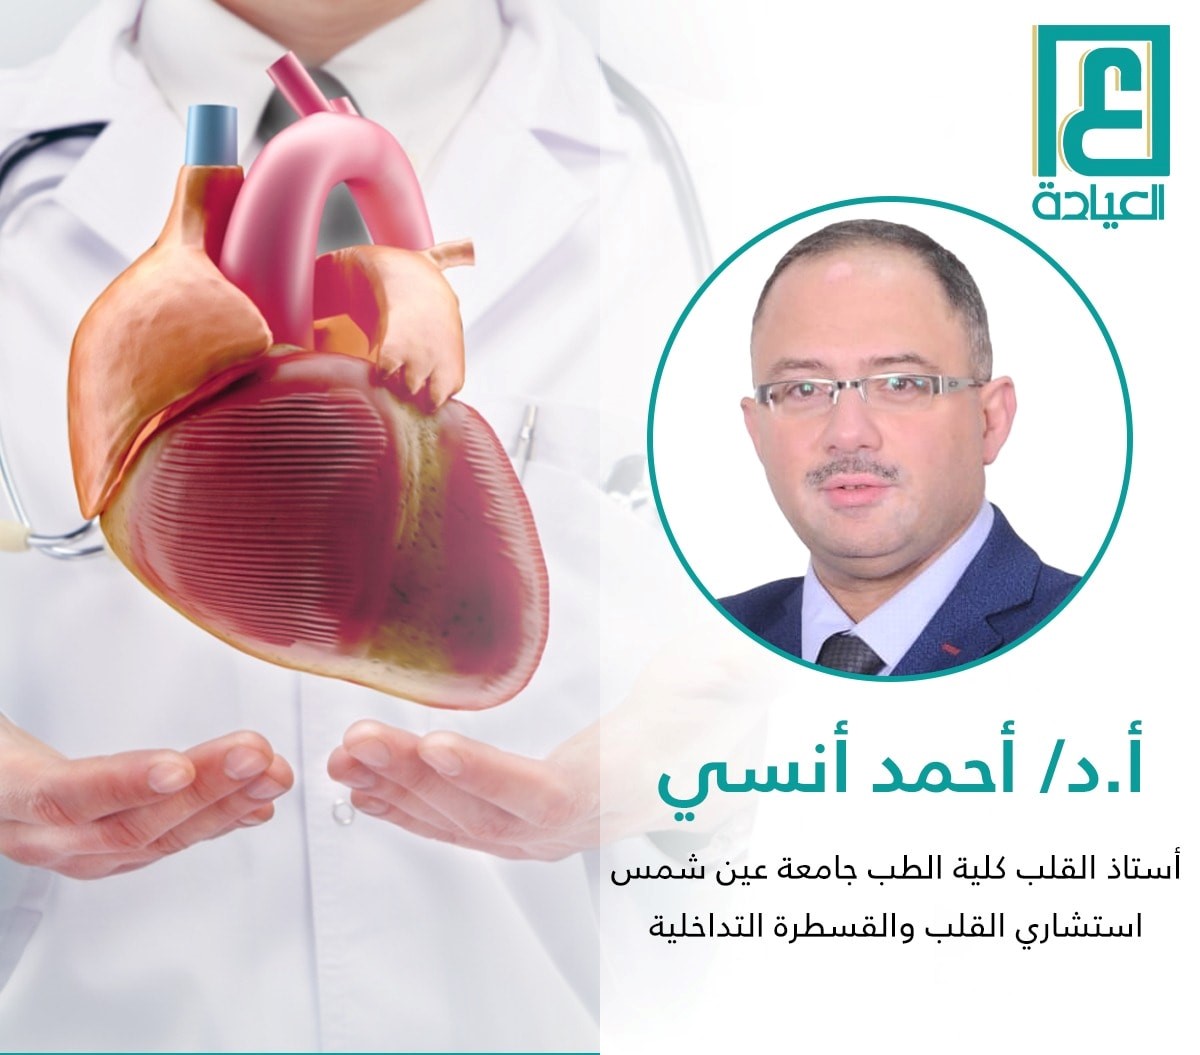 Dr. Ahmed Onsy